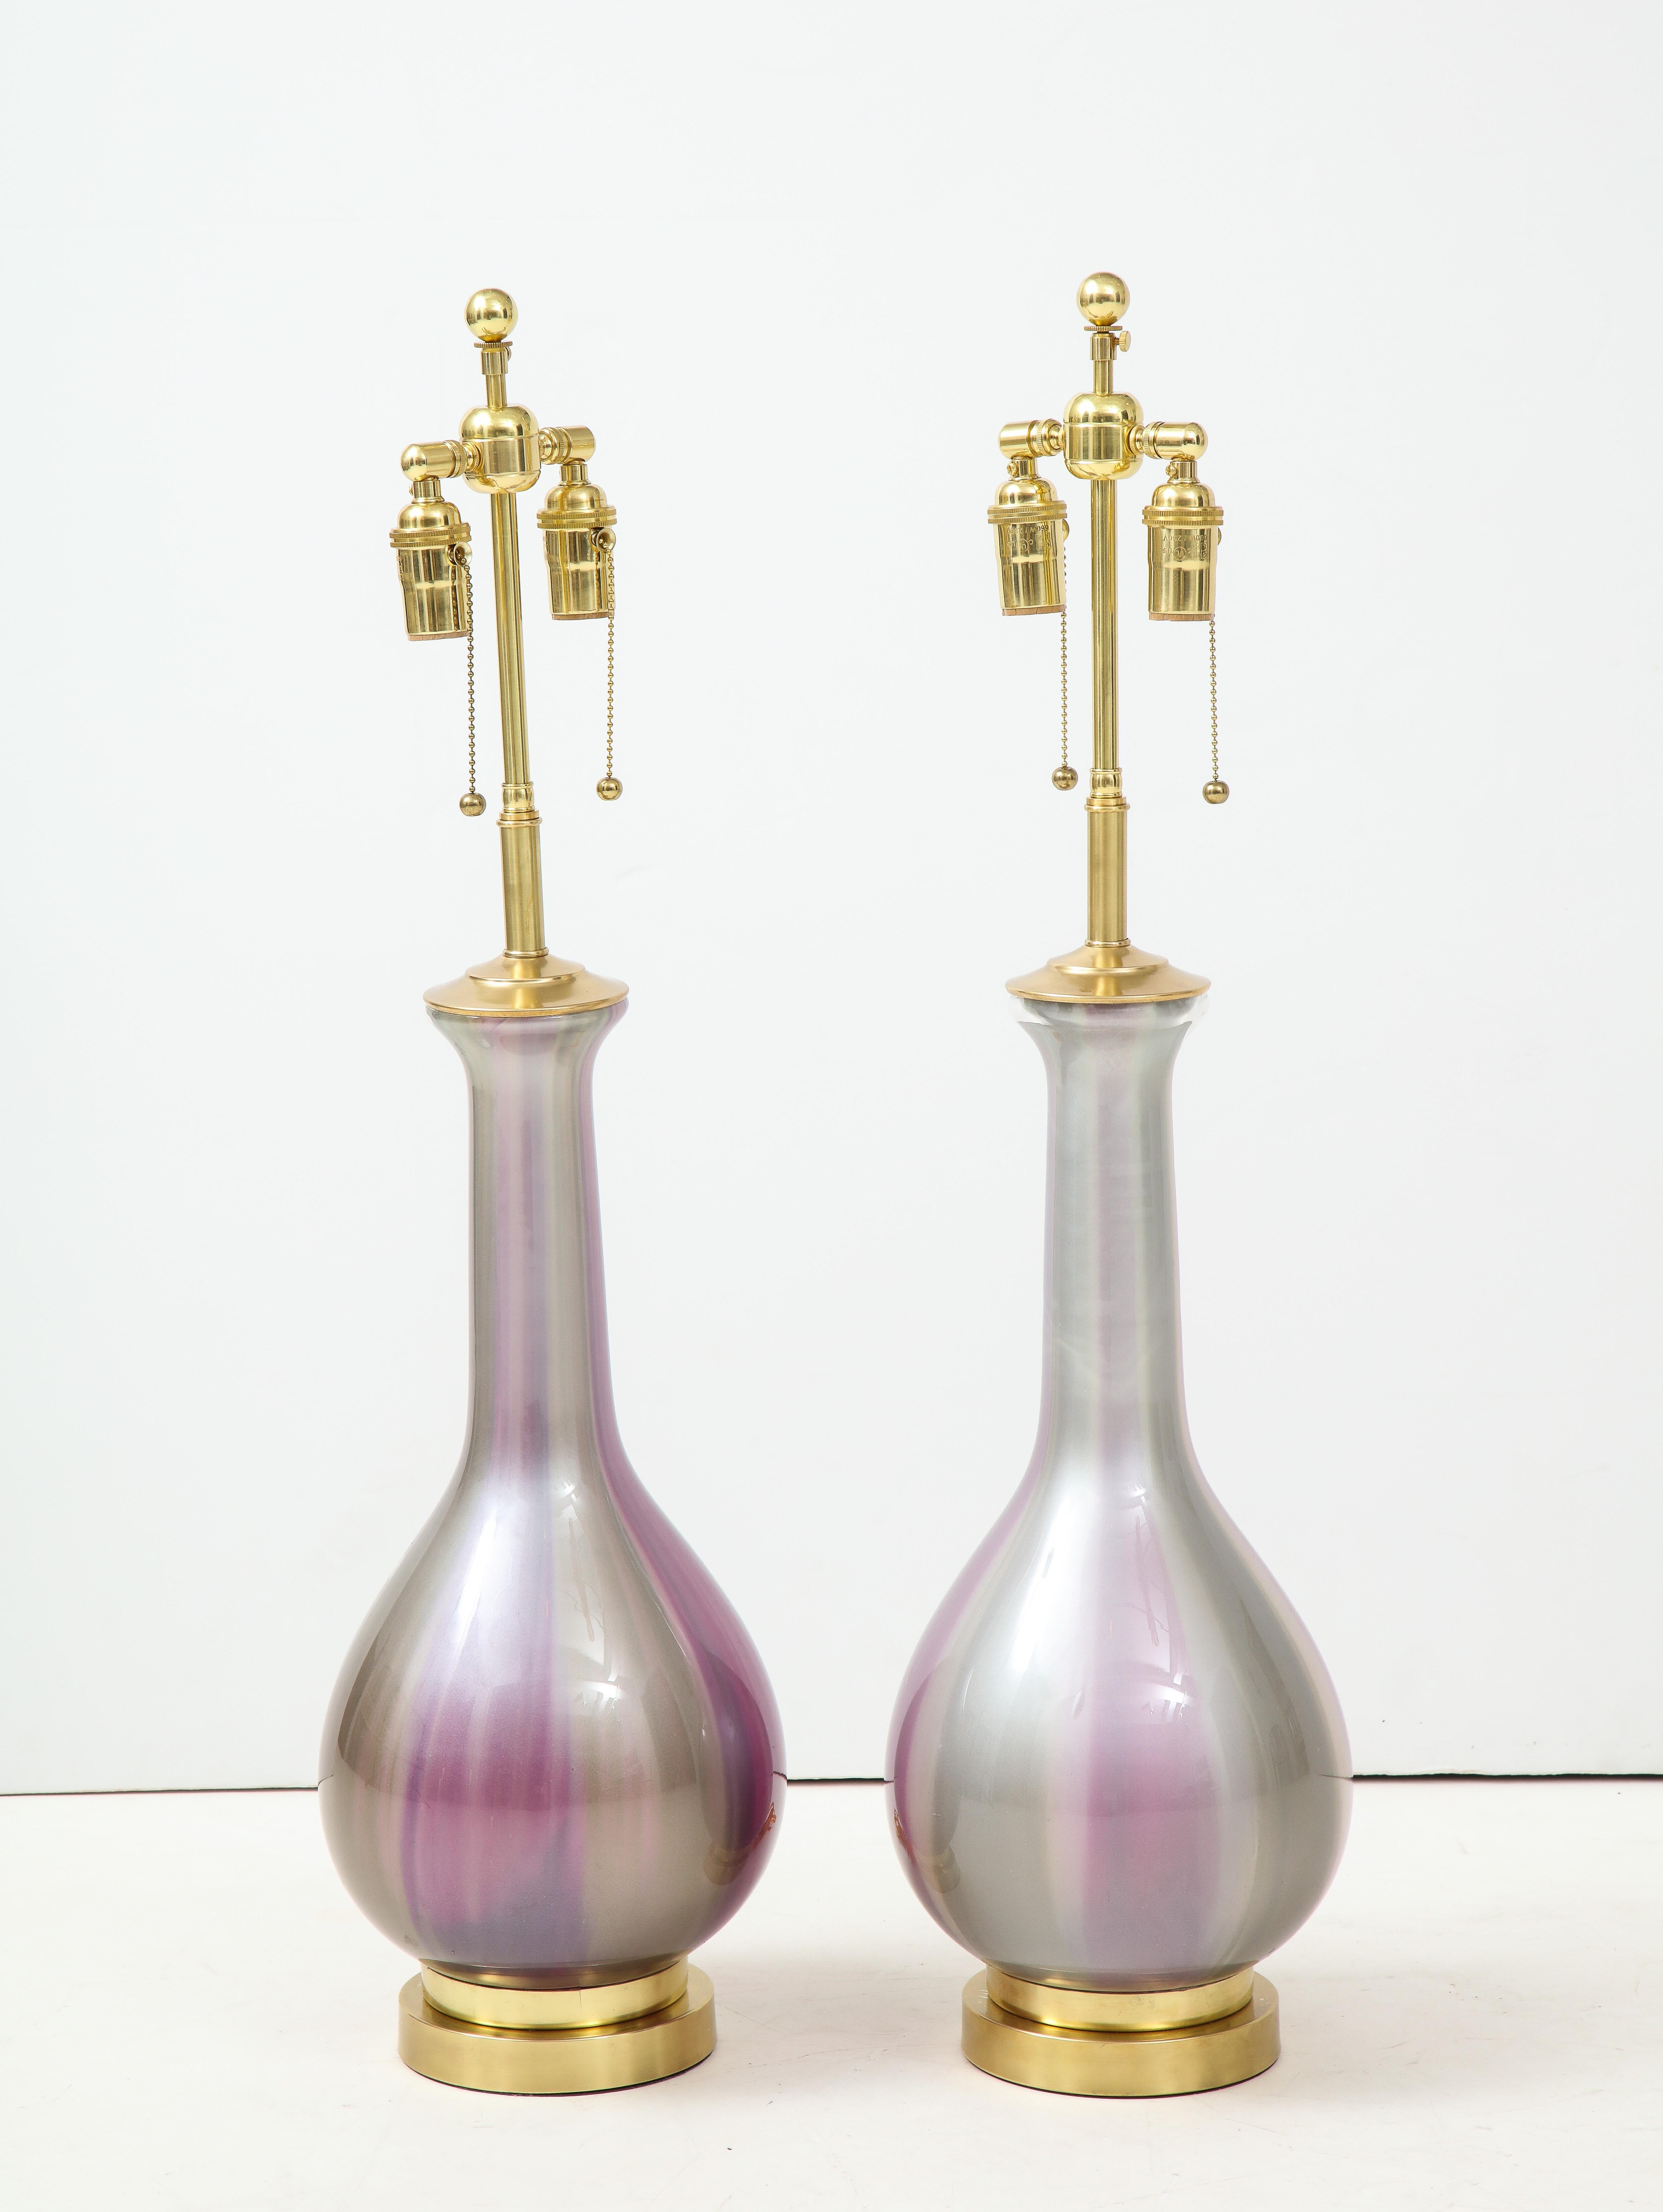 American Pair of Iridescent Lamps by Frederick Cooper